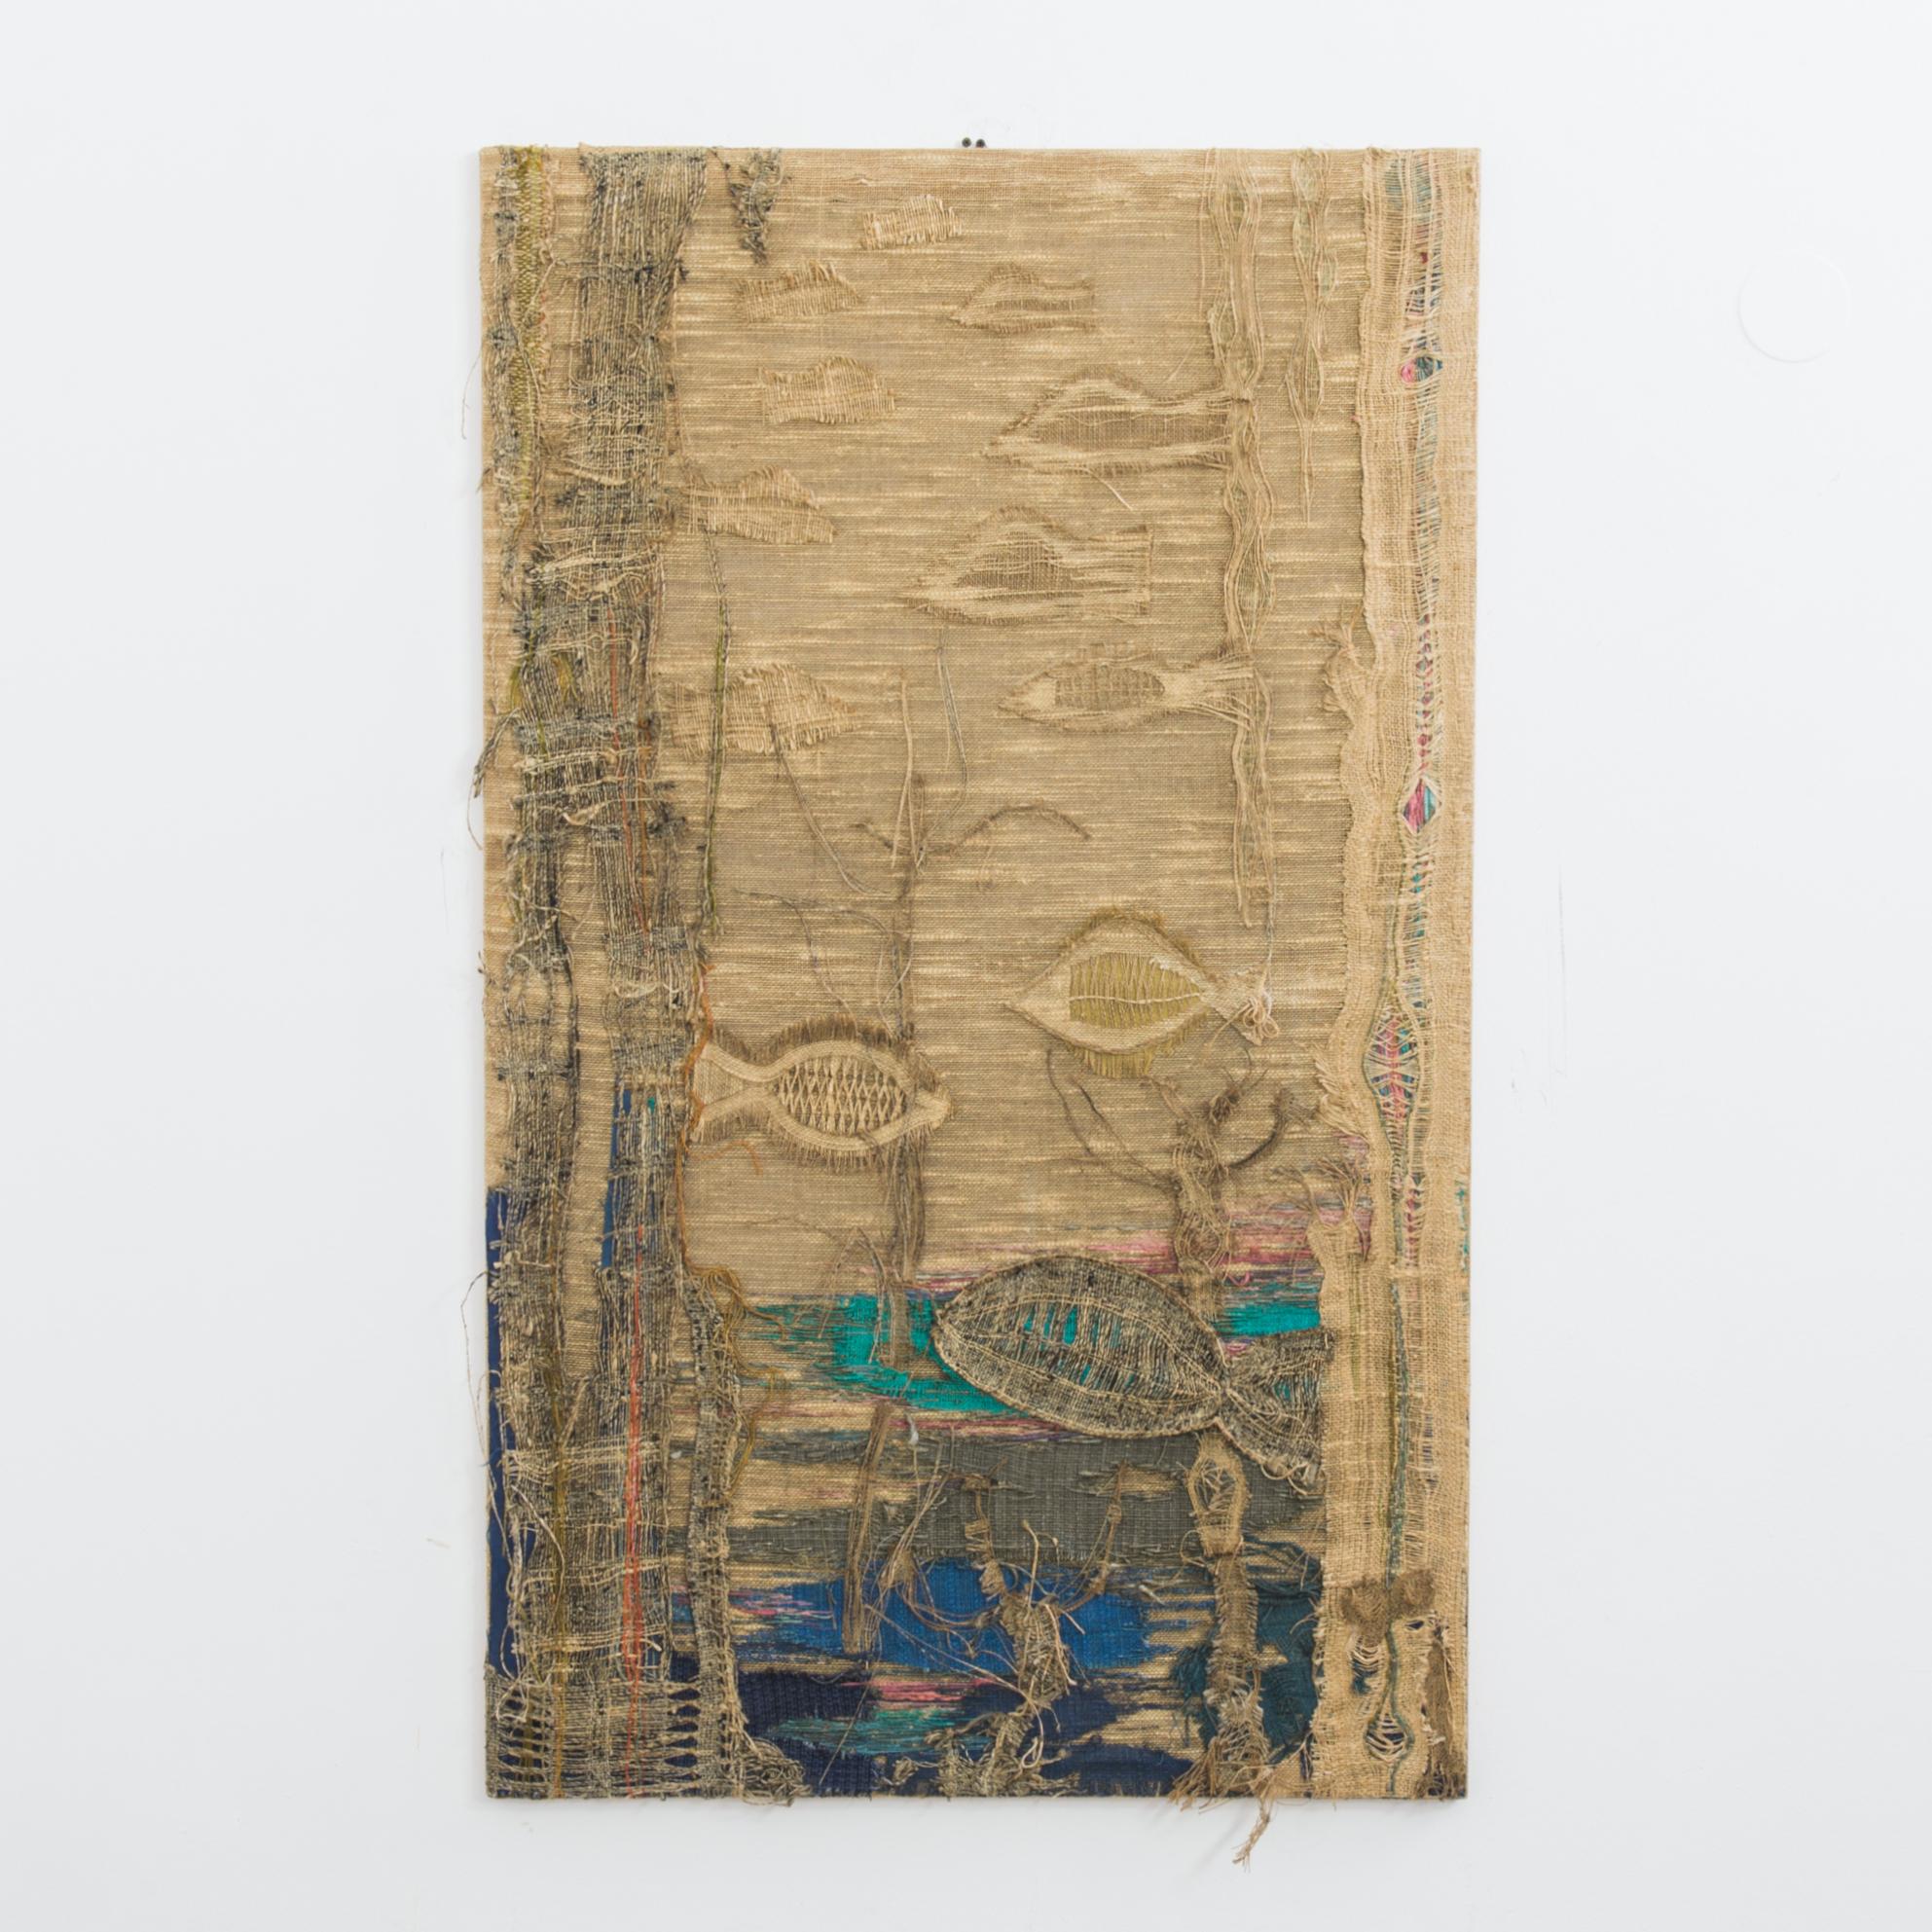 This artwork was made in Scandinavia, circa 1960, and plays with the qualities of jute to depict a dreamy underwater scene. The threads of the jute are layered, sewn together, and separated, creating the patterns on the fish and ripples in the sea.